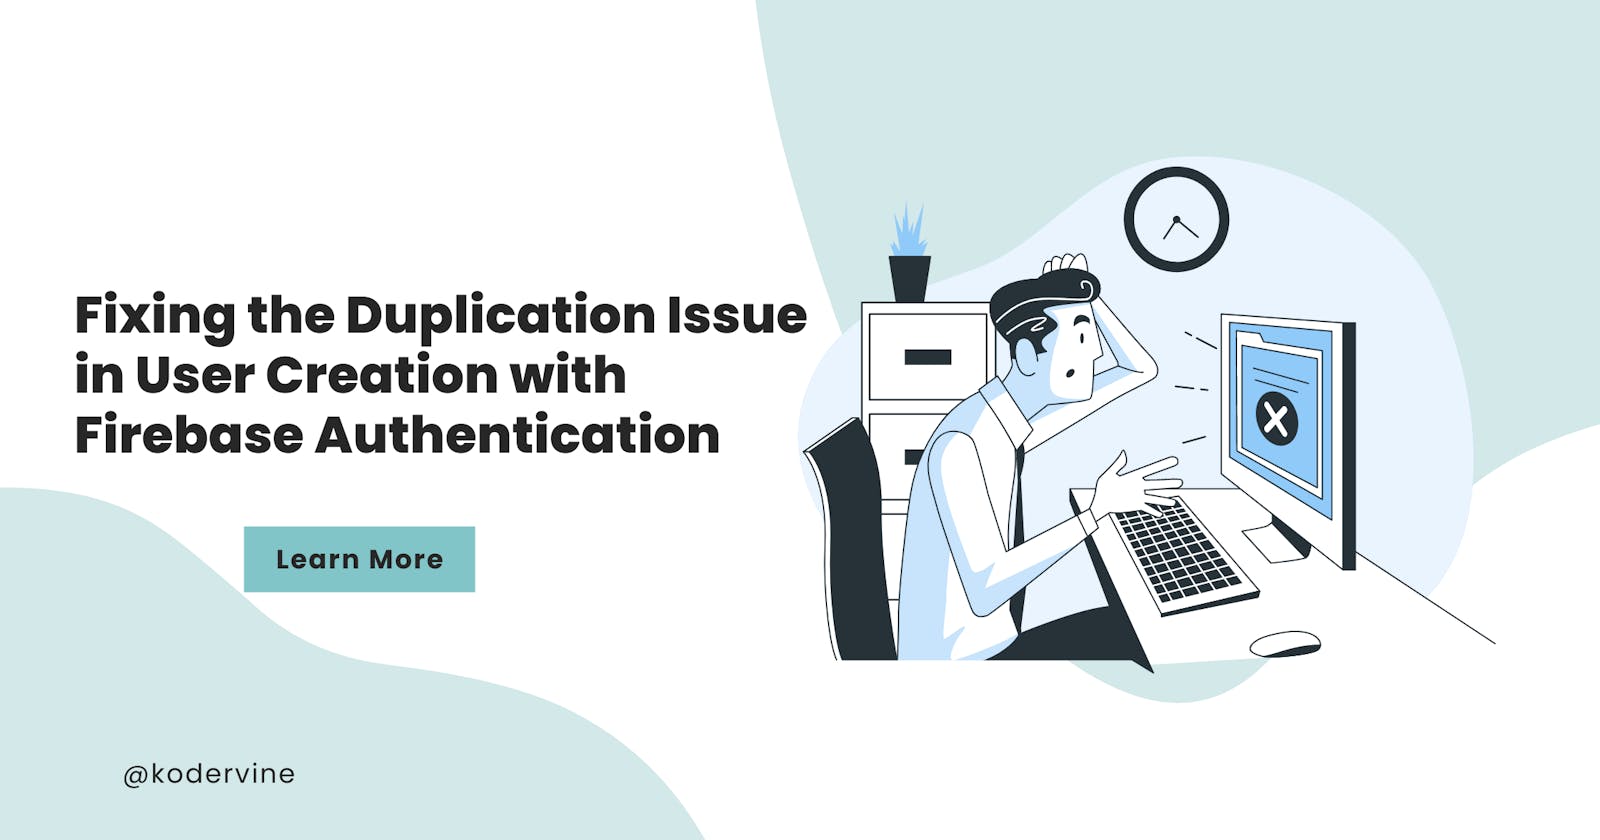 Fixing the Duplication Issue in User Creation with Firebase Authentication